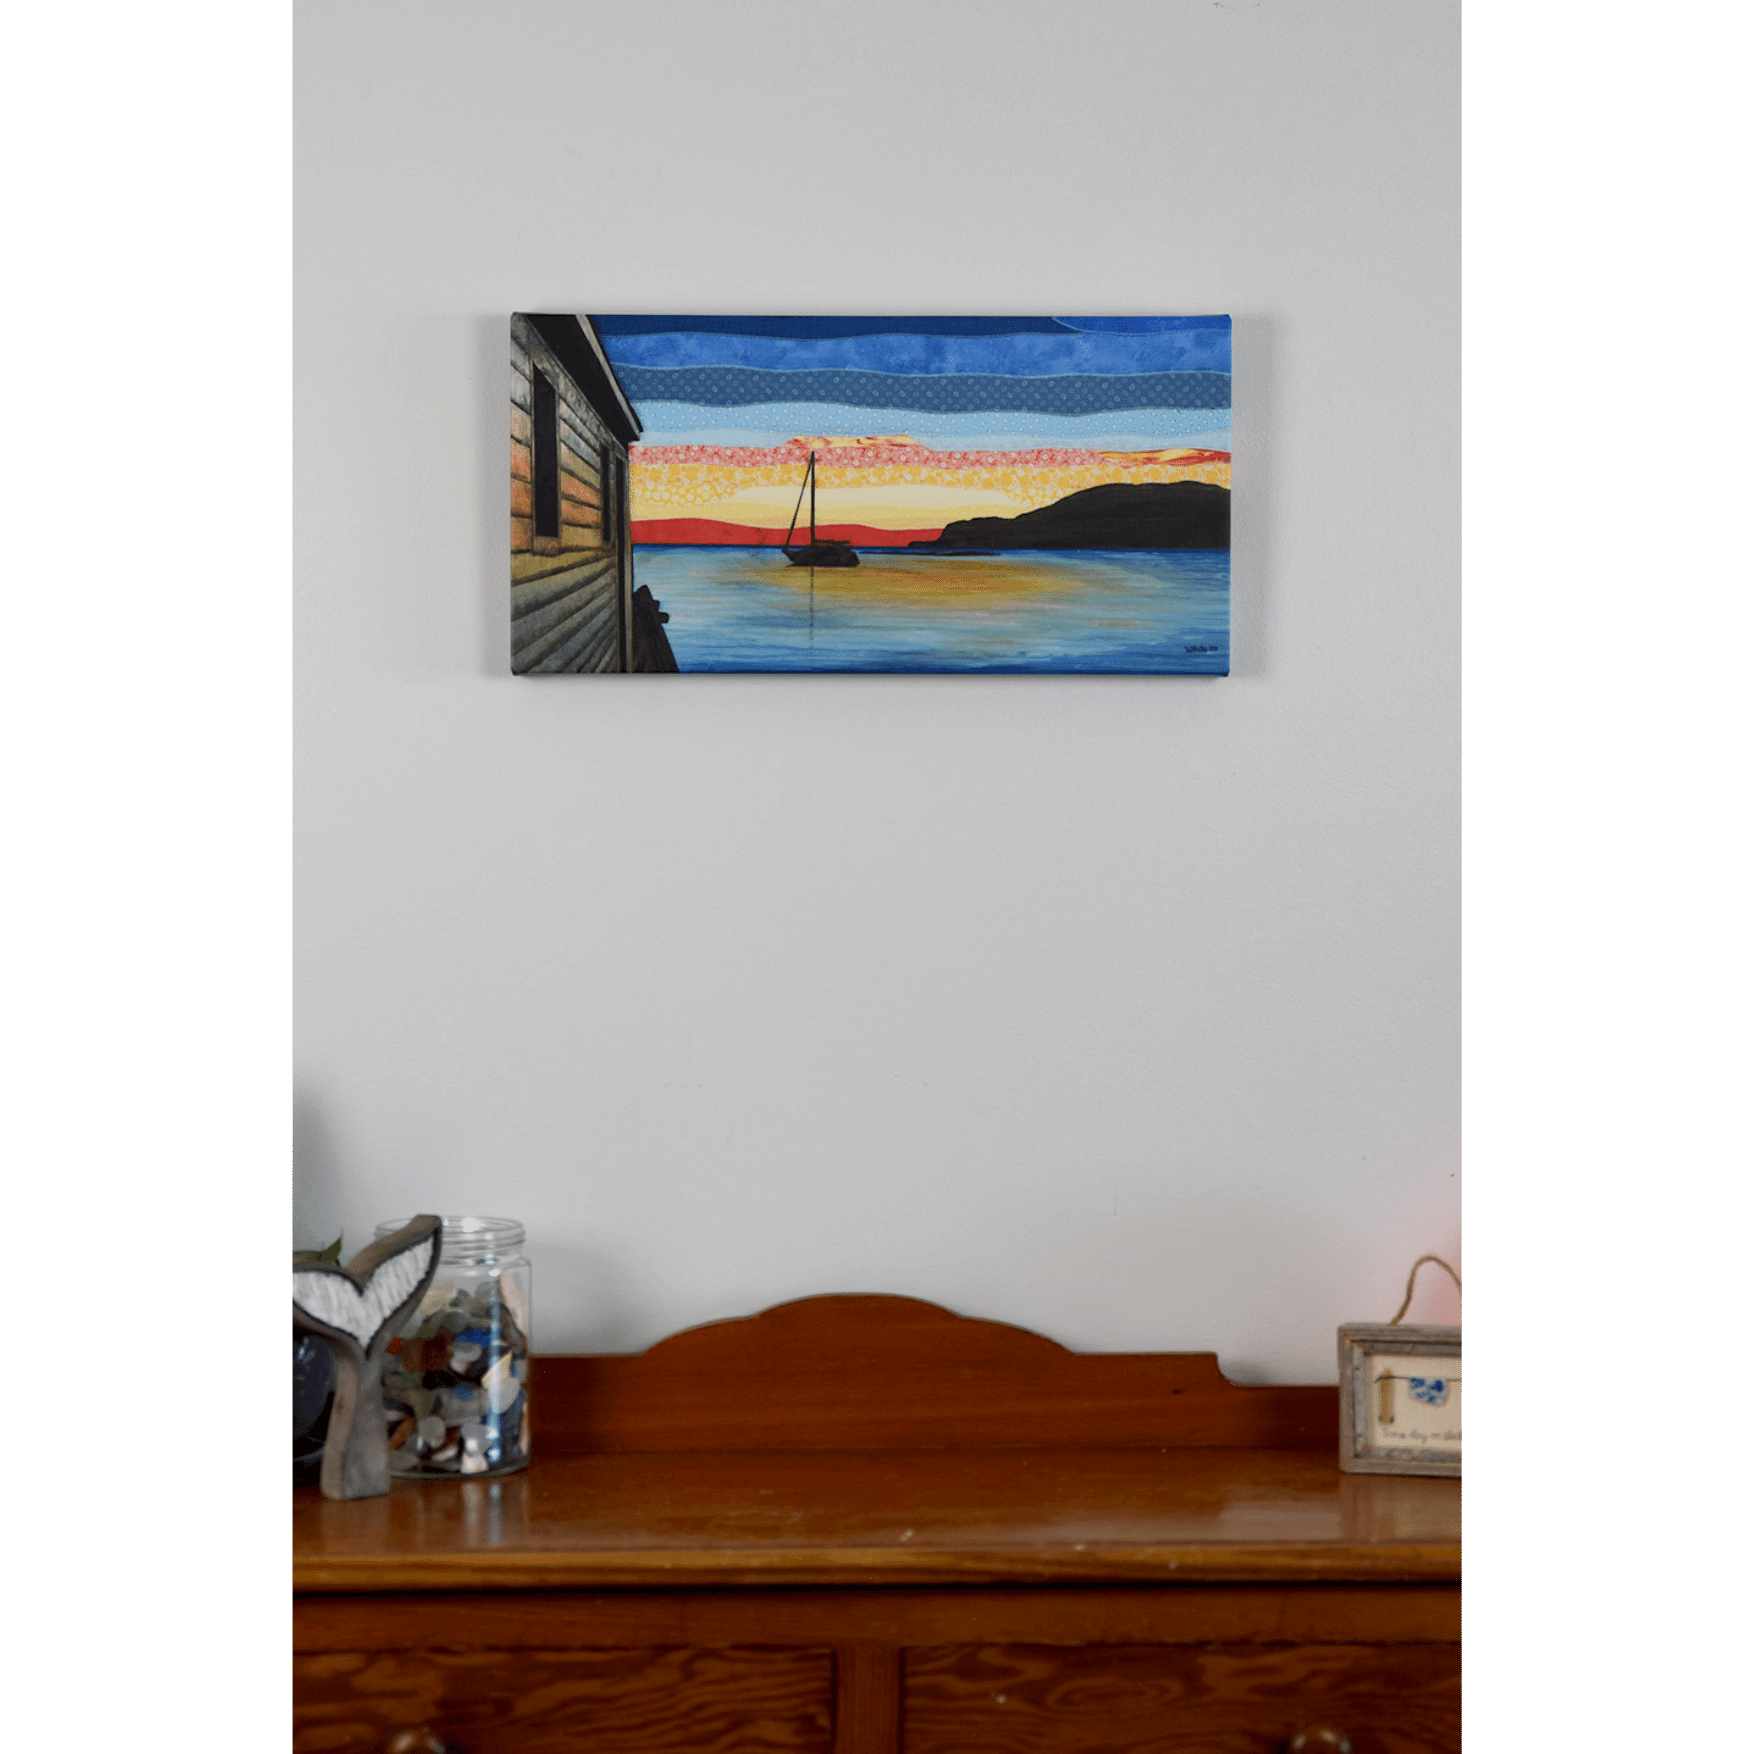 "Silhouettes" is a reproduction canvas that depicts a sailboat at sunset in Back Harbour, Twillingate. The red and orange hues are reflected in the calm ocean.